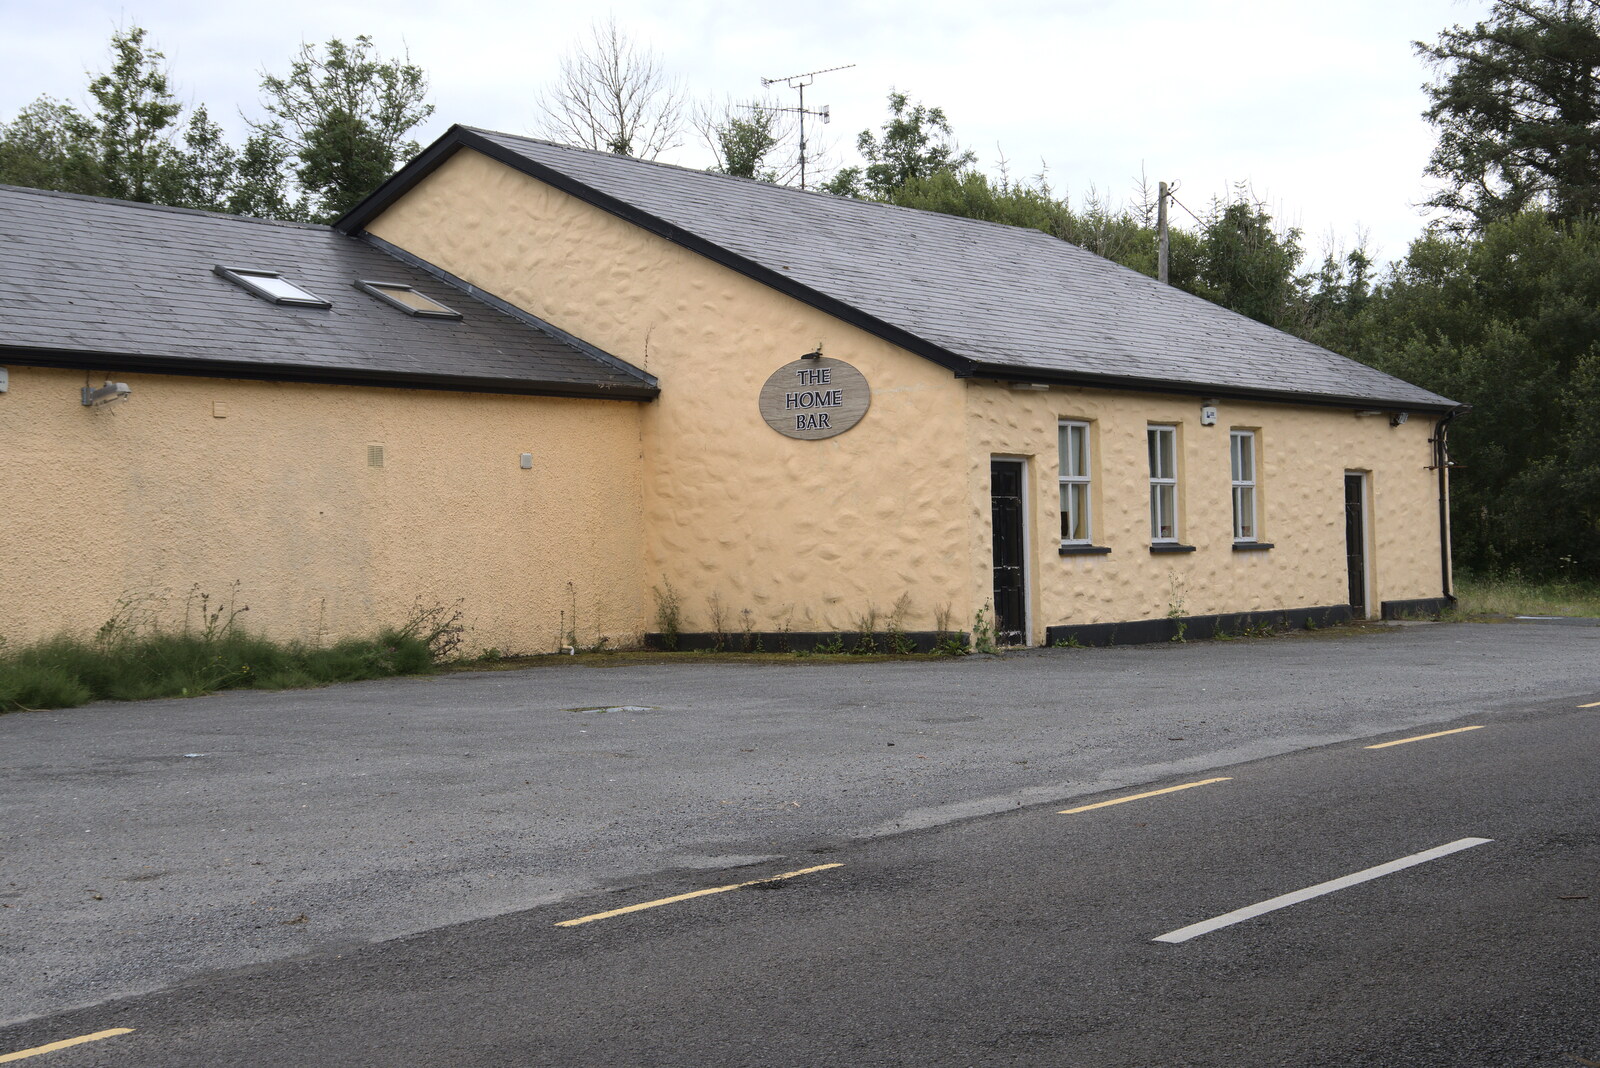 A Trip to Manorhamilton, County Leitrim, Ireland - 11th August 2021: The abandoned Home Bar at Ros Inbhir